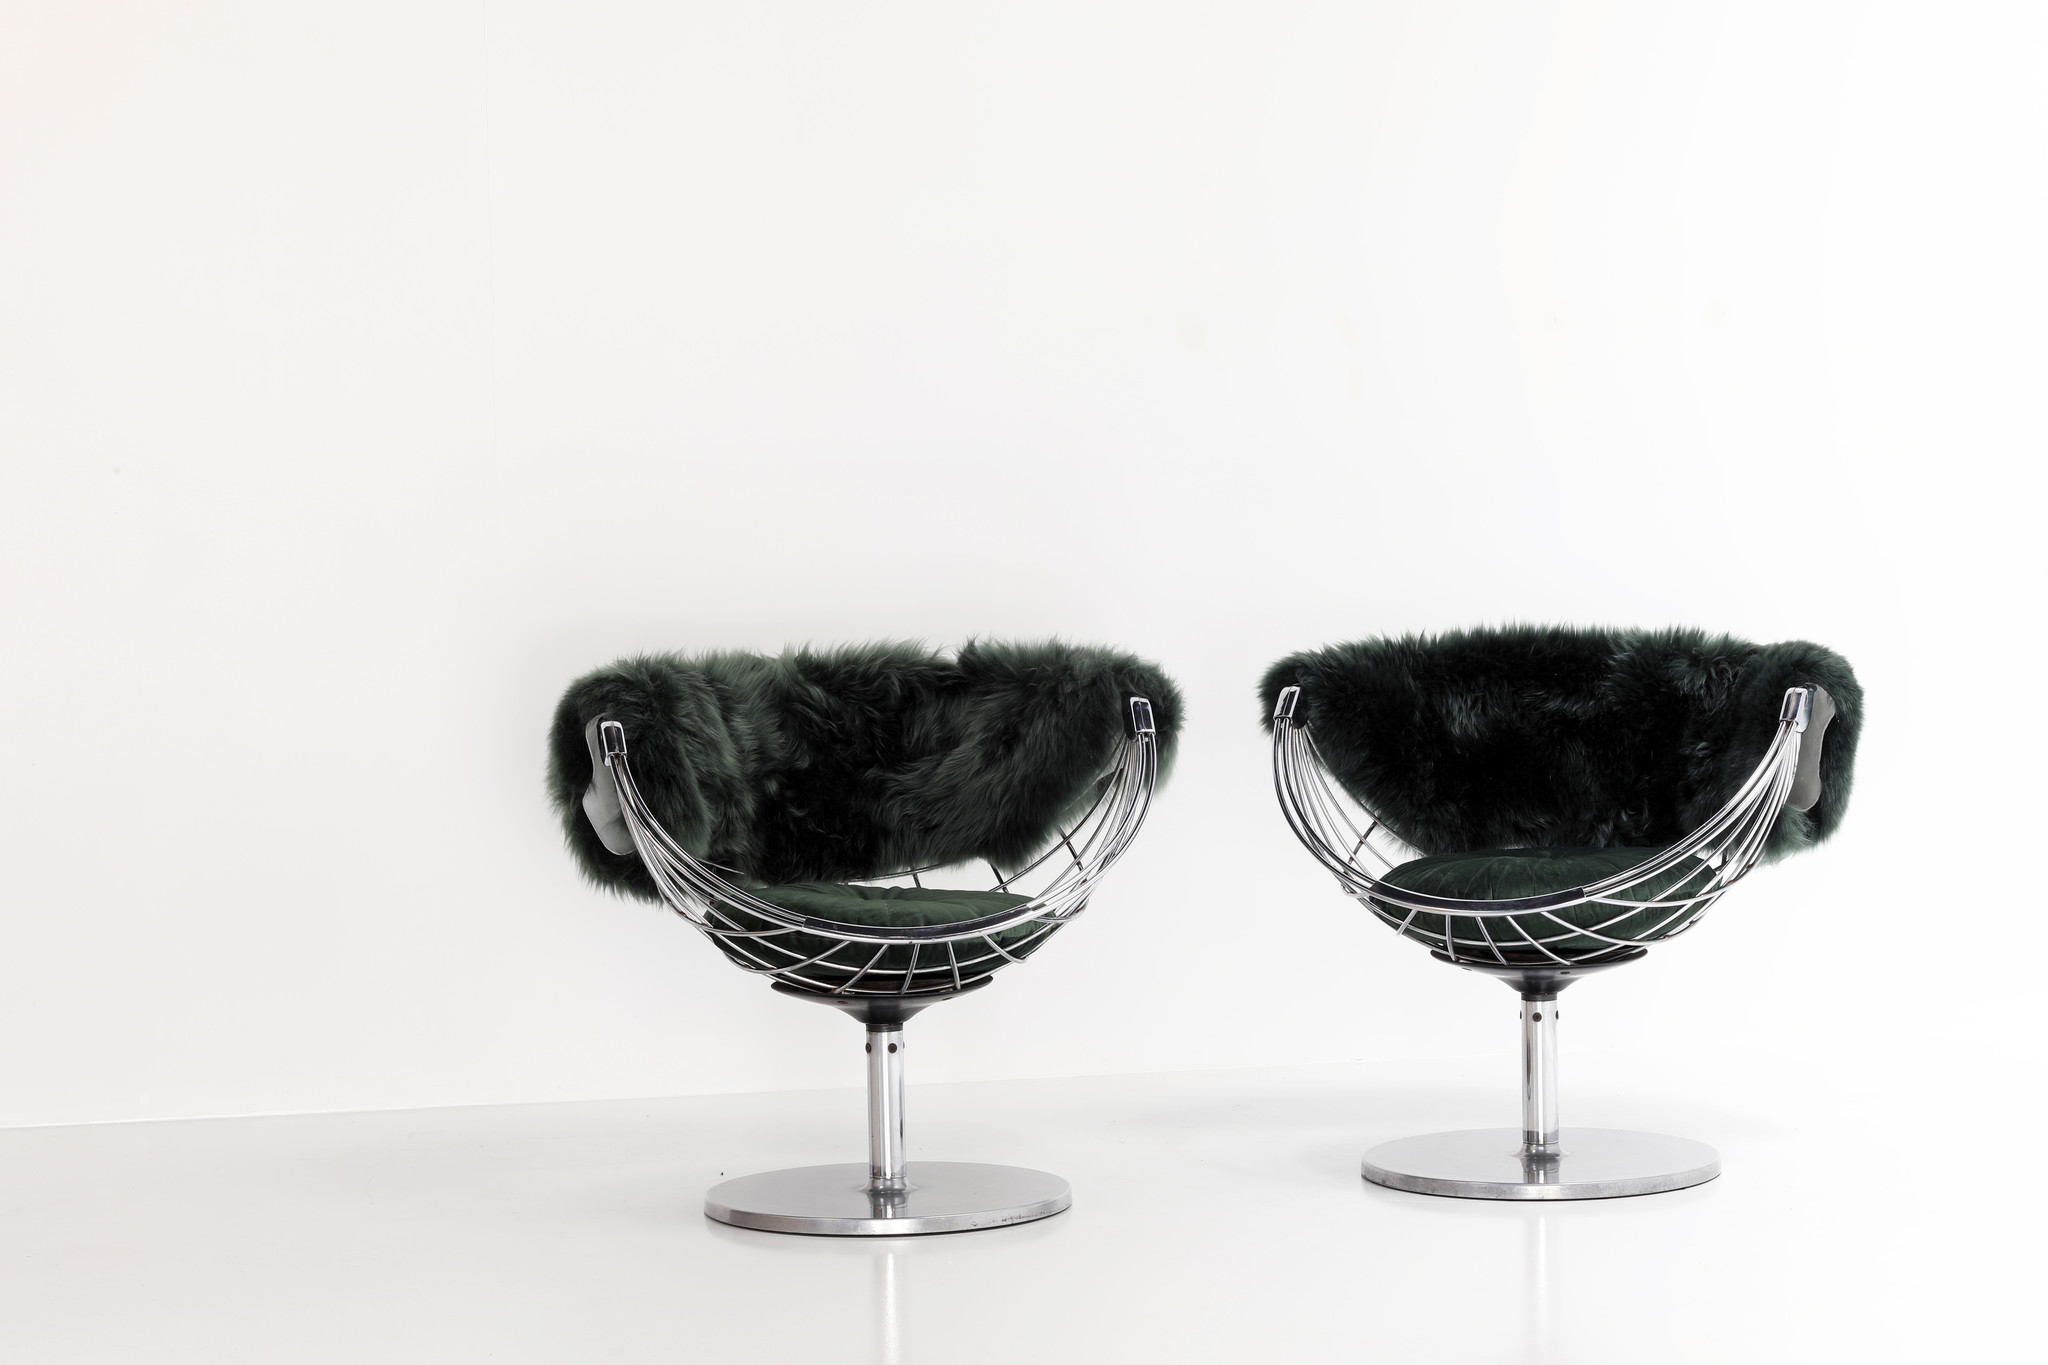 Atomic Ball Chairs by Rudi Verelst for Novalux, 1974